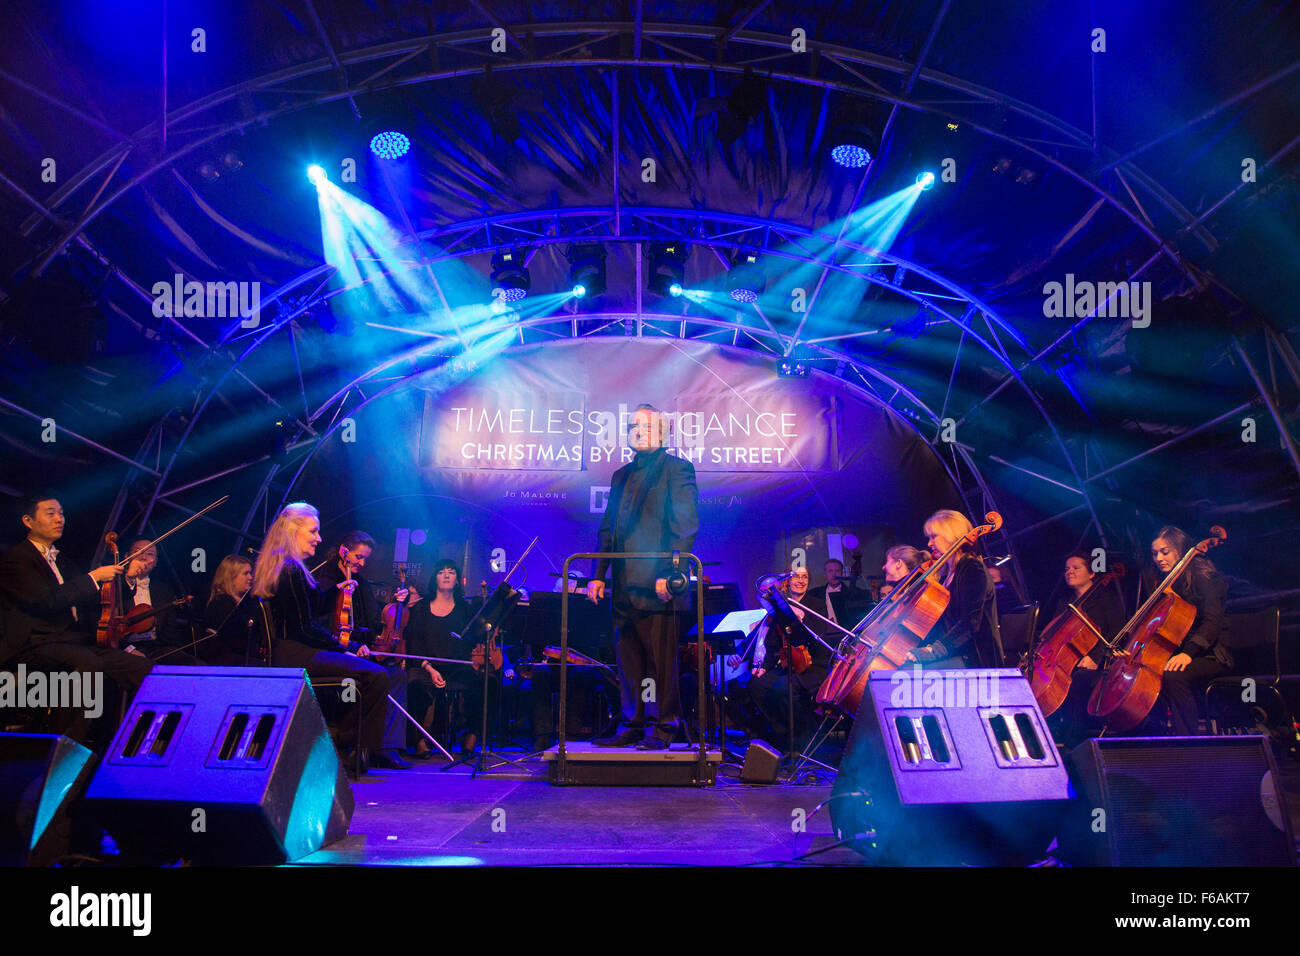 London, UK. 15 Novemebr 2015. The Philharmonia Orchestra conducted by Nicholas Dodd. Ballet superstar and Strictly Come Dancing judge Darcey Bussell switches on the 2015 Christmas Lights in Regent Street. The 2015 lights entitled Timeless Elegance are sponsored by Jo Malone. Credit:  Vibrant Pictures/Alamy Live News Stock Photo